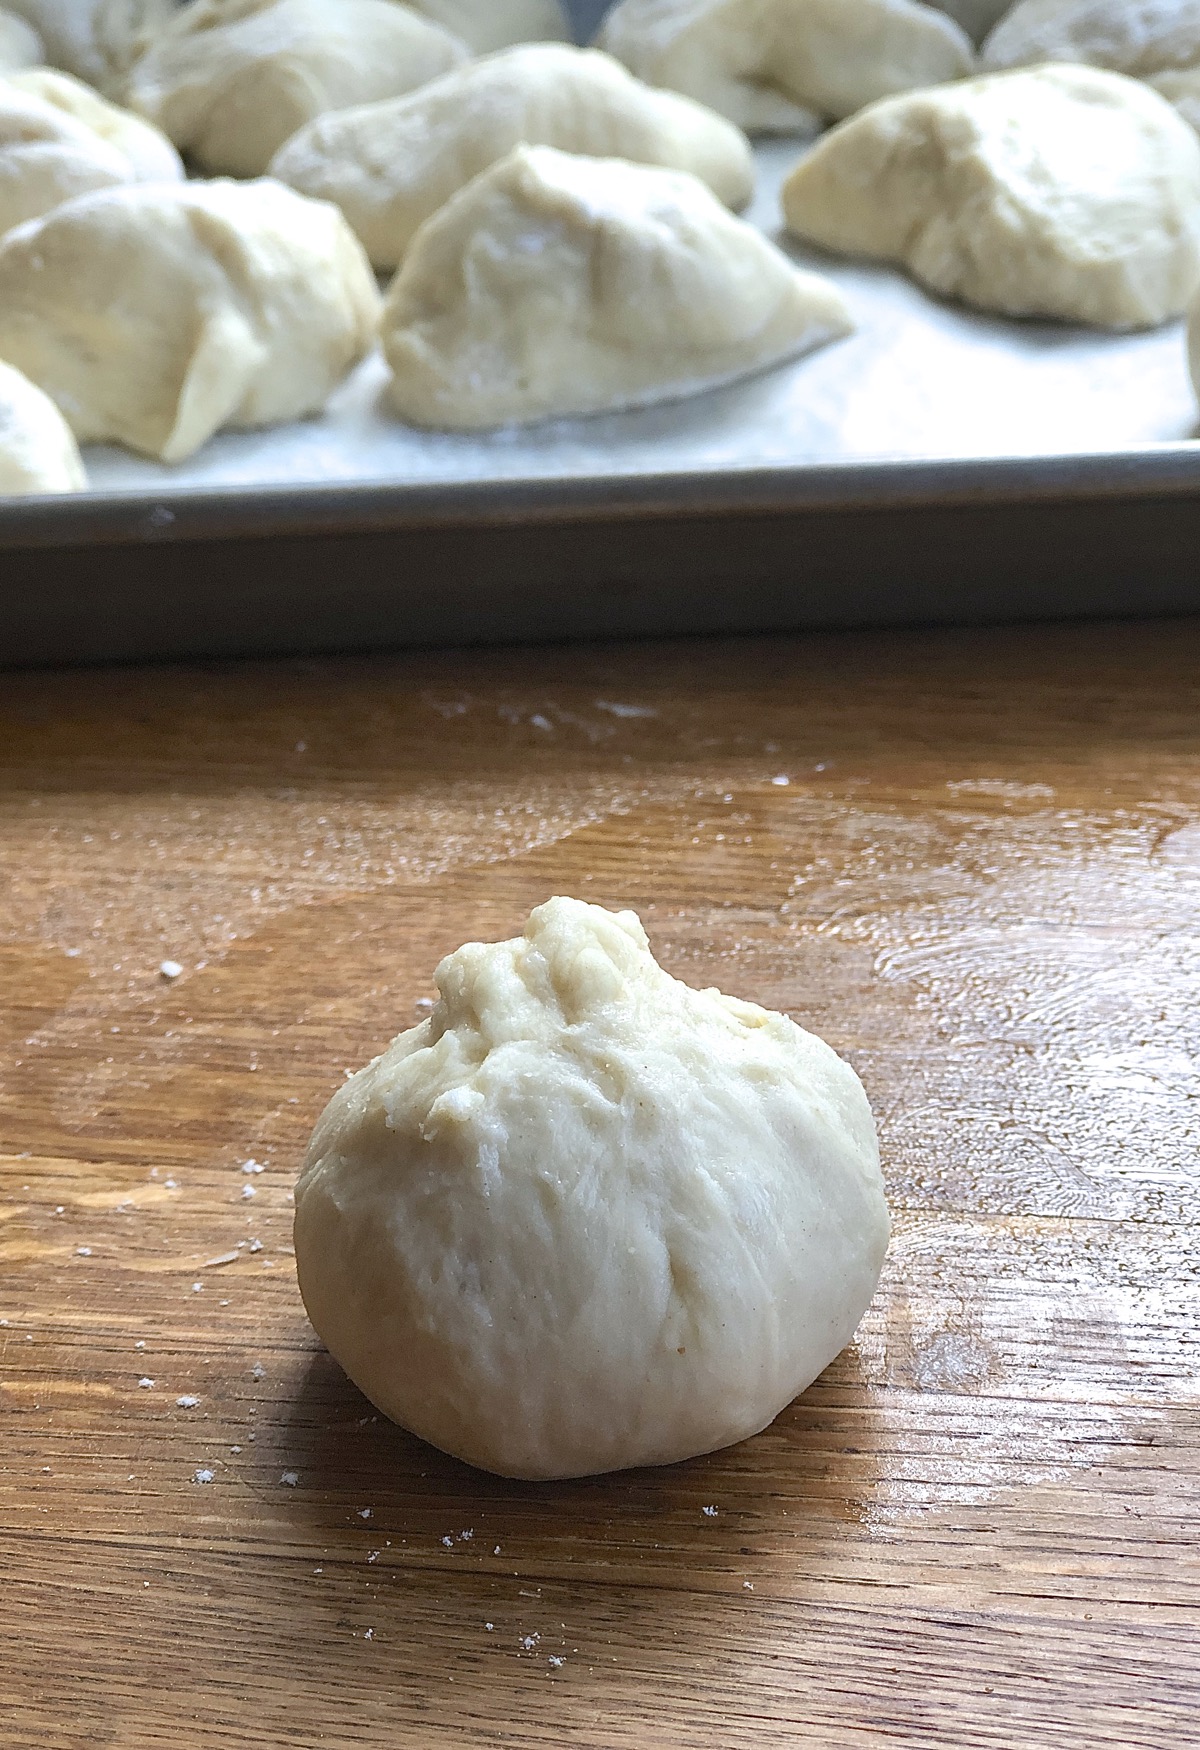 Piece of dough rolled into a rough ball.